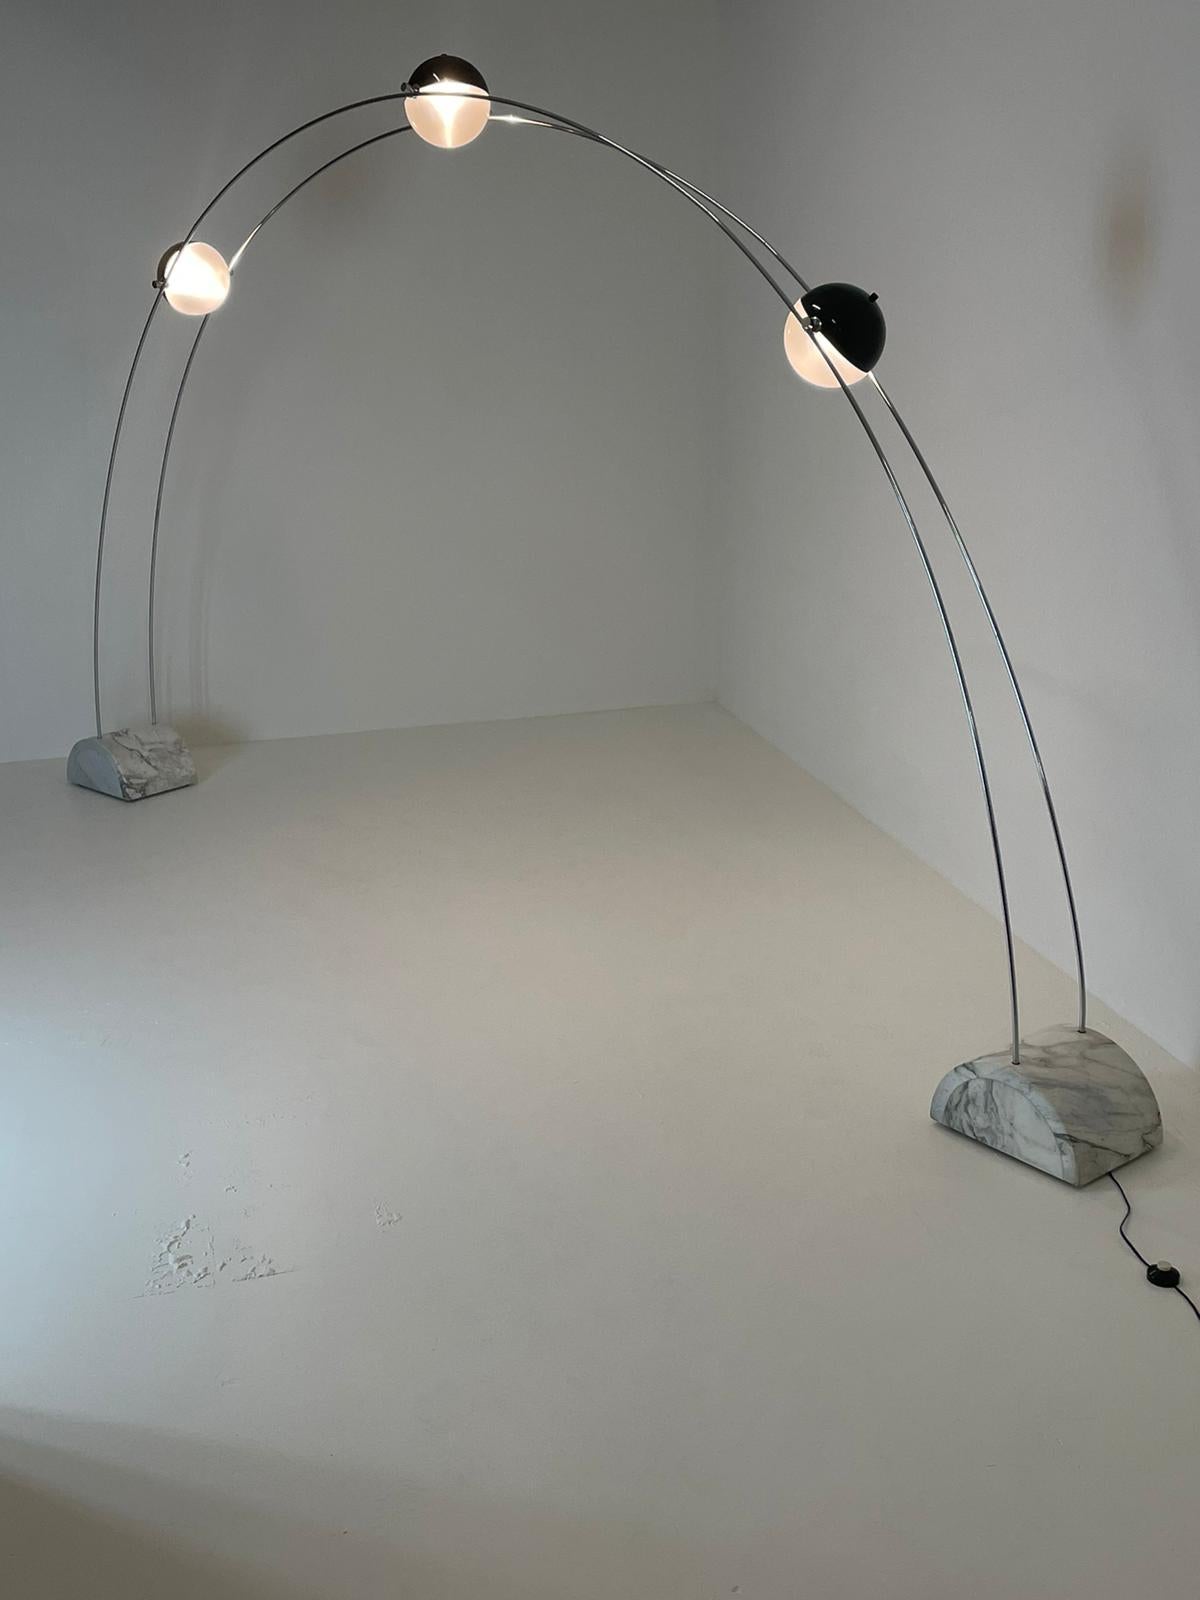 Beautiful floor lamp from the 70s designed by Studio A.R.D.I.T.I. for Sormani, 'Ponte' model, in marble, metal and plastic.

This wonderful artistic floor lamp spans an arc in your room. 
Two thin chrome stems branch off from two marble bases.